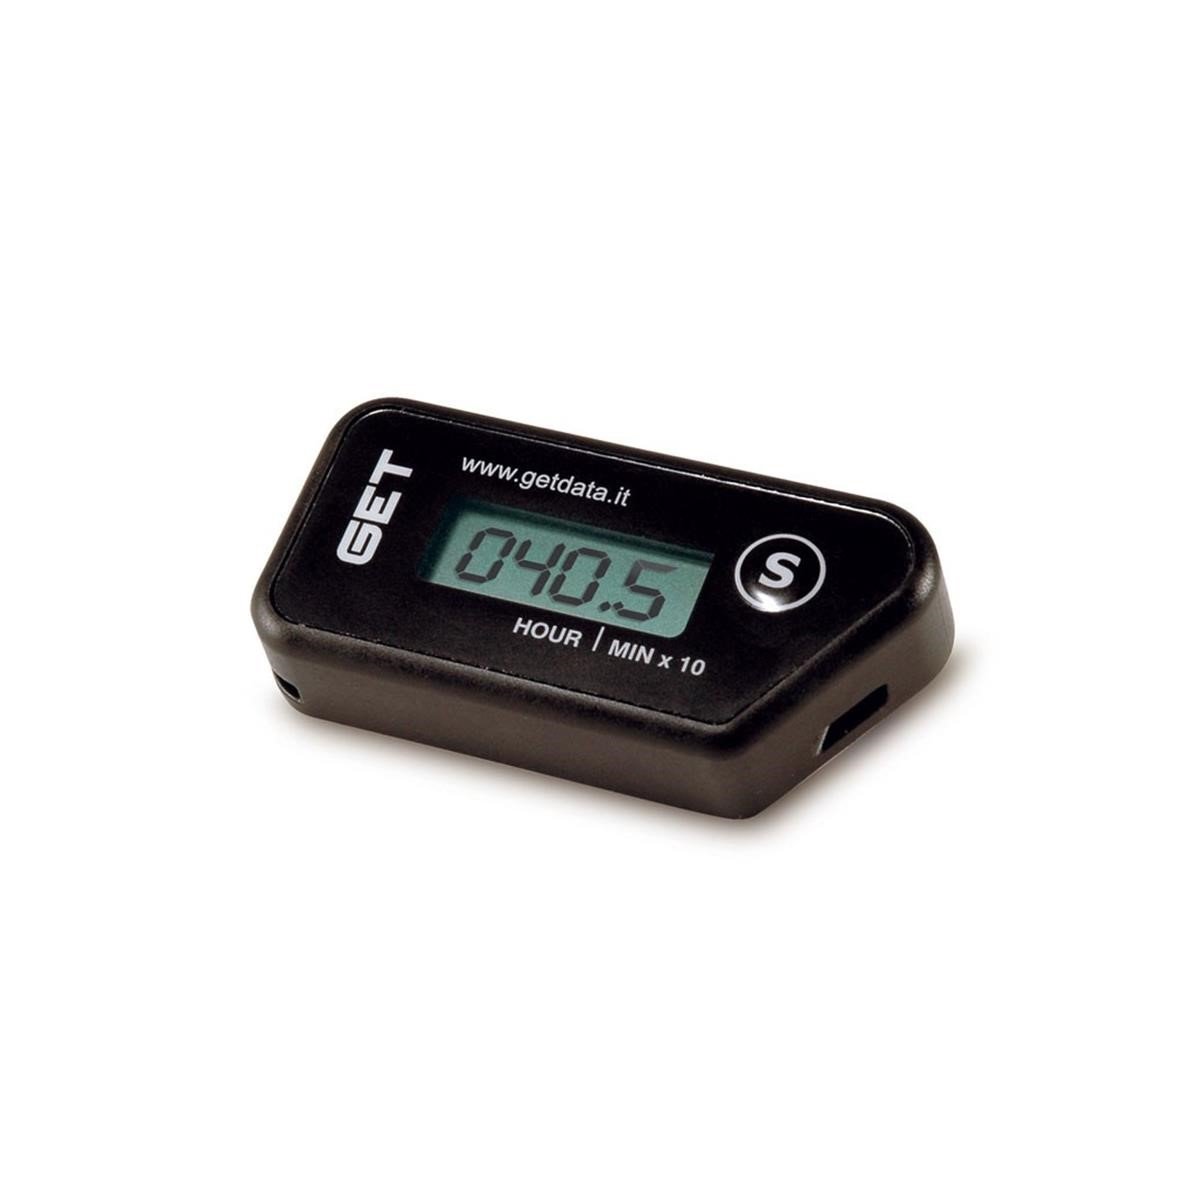 Athena Operating hours counter C1 Black